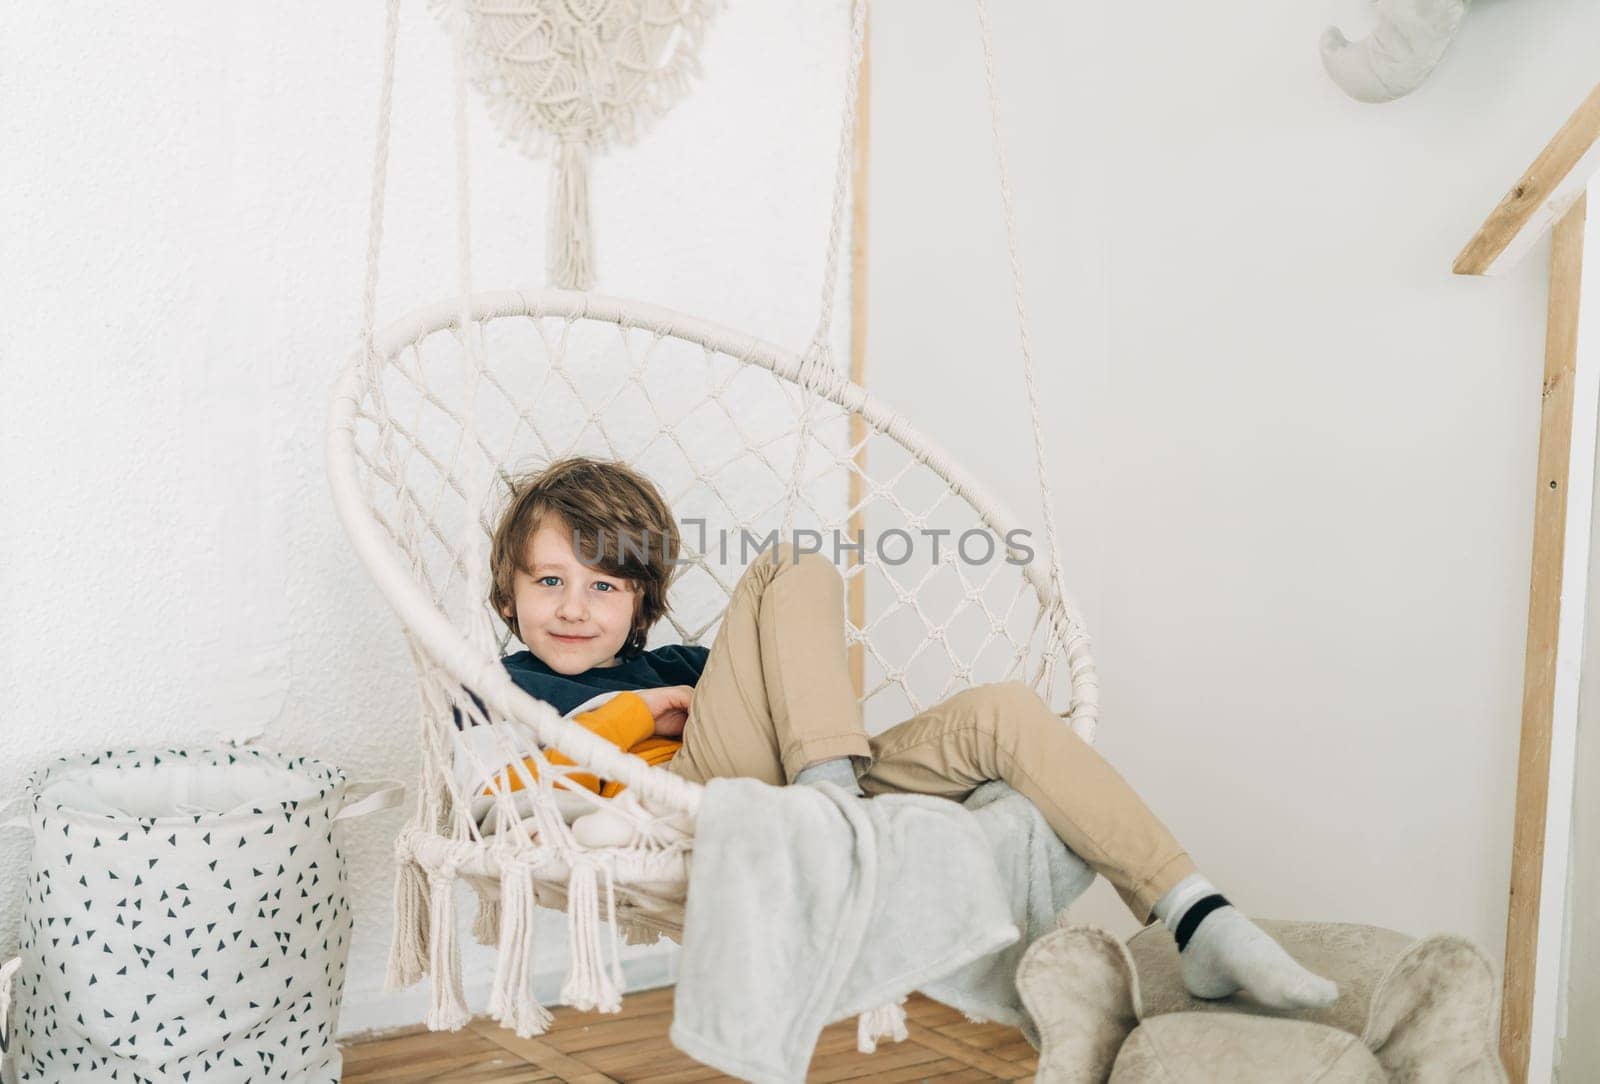 School boy child kid sitting relaxing chilling in the swing arm chair in his room.